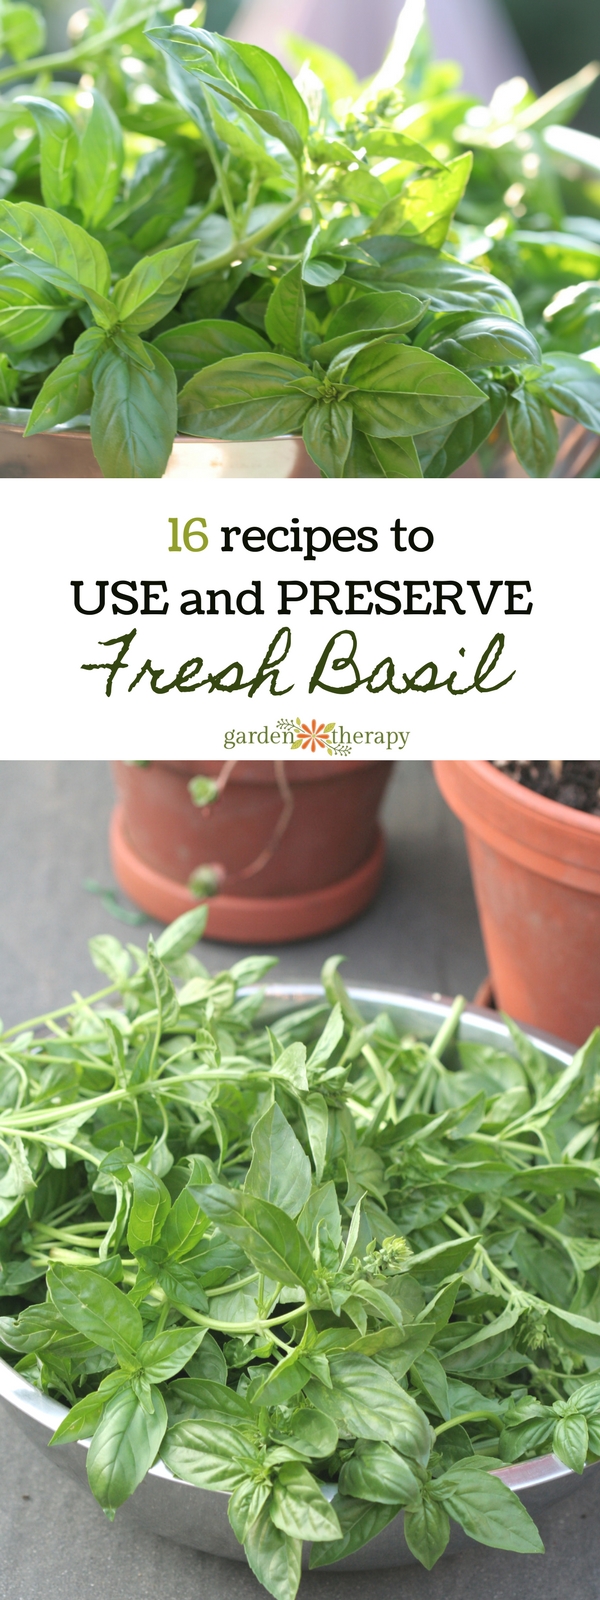 16 Recipes for Using or Preserving Basil